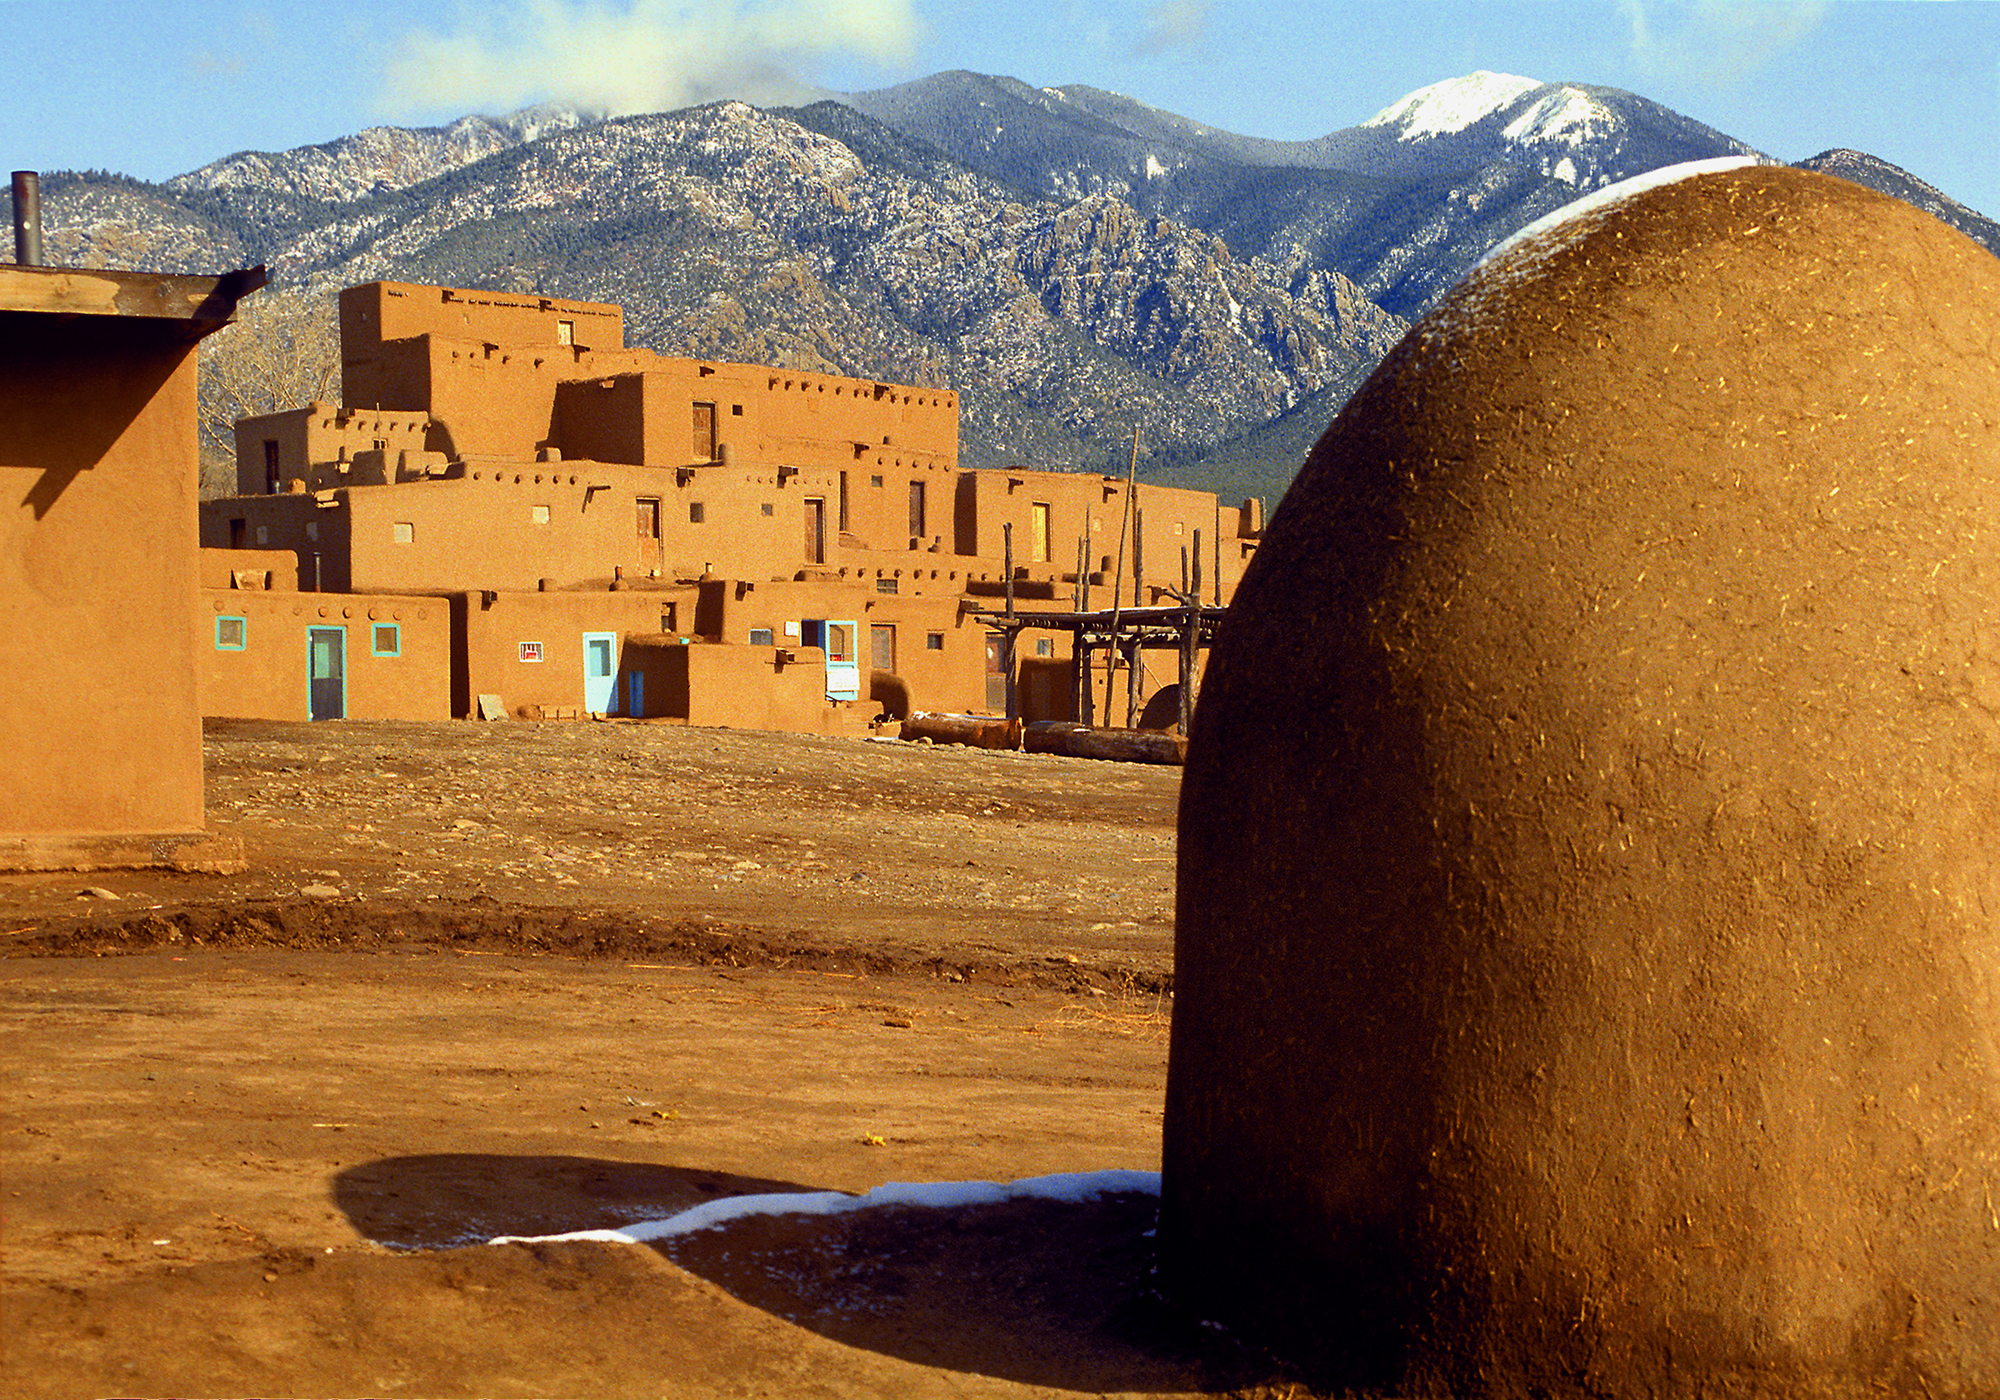 An ancient pueblo building with a backdrop of snow-covered mountains.